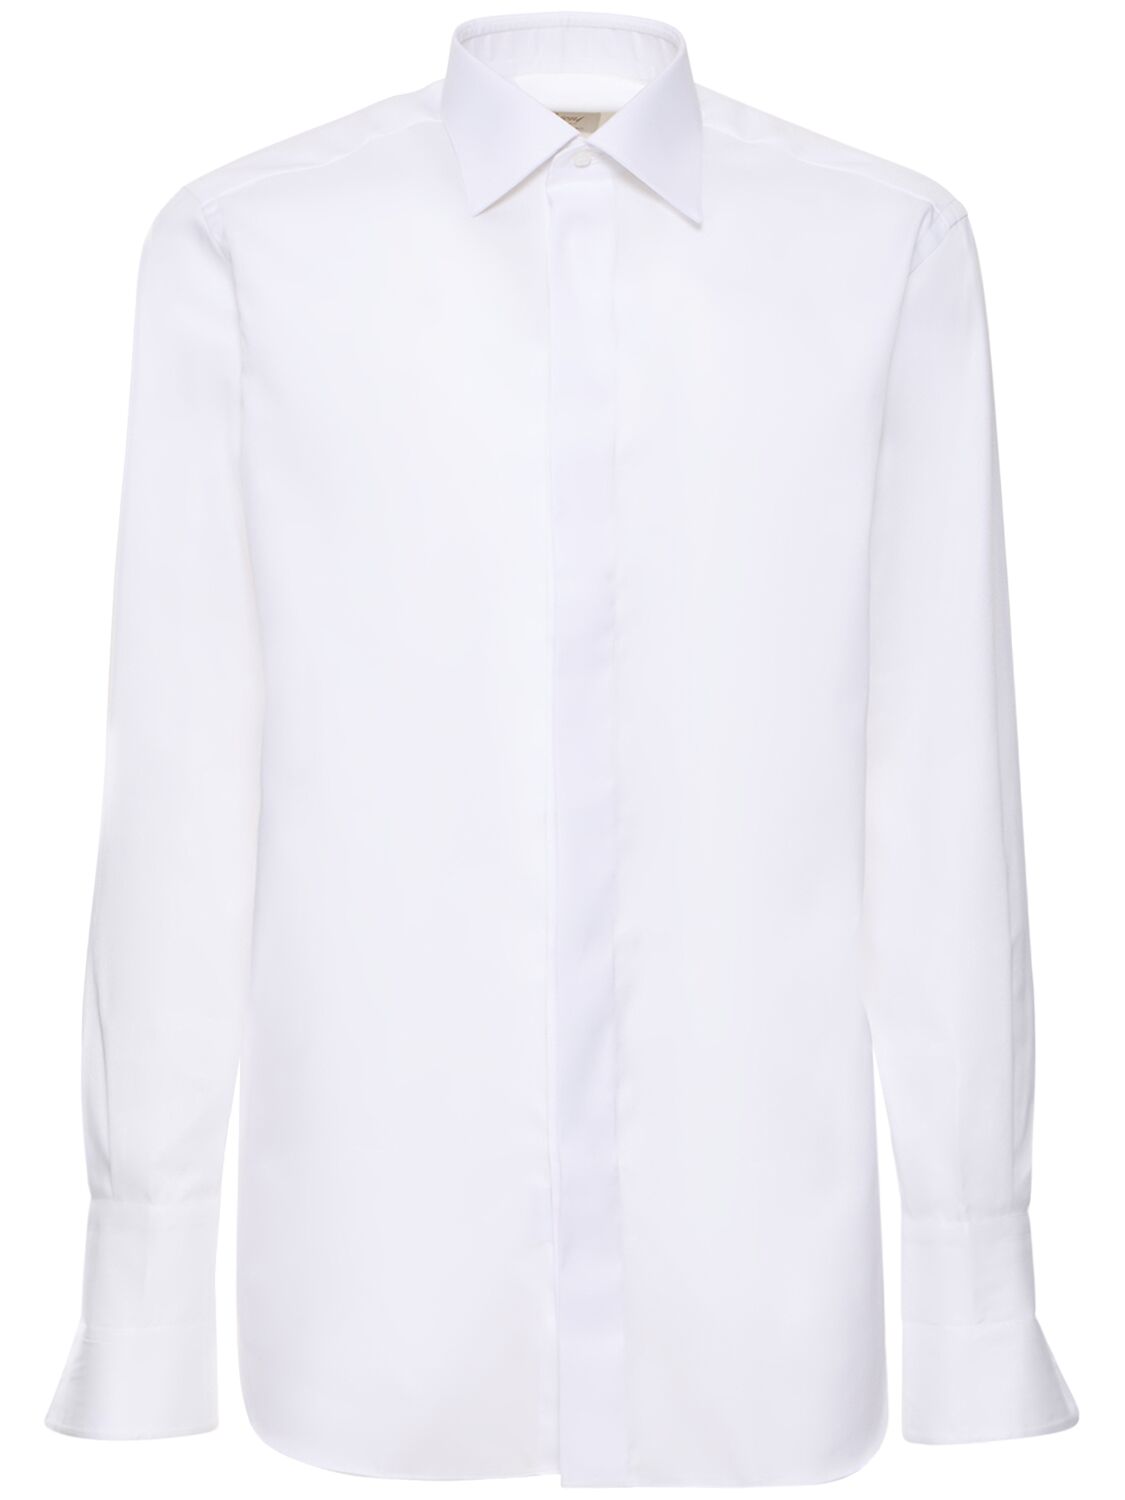 Image of Cotton Twill Formal Shirt